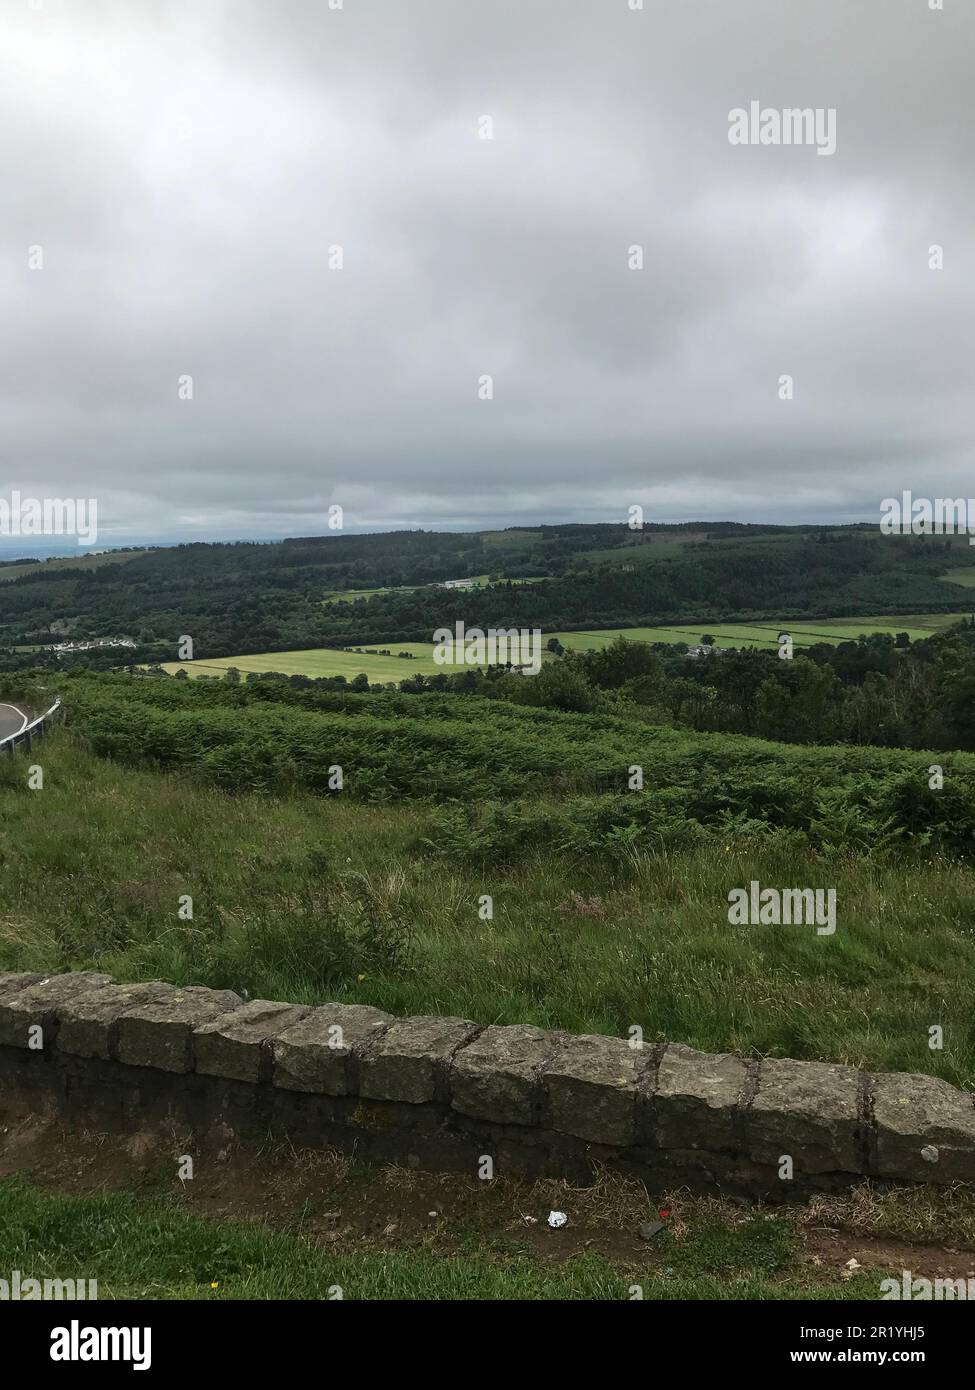 The scenic view of the lush green countryside on a cloudy day from the top of a hill Stock Photo